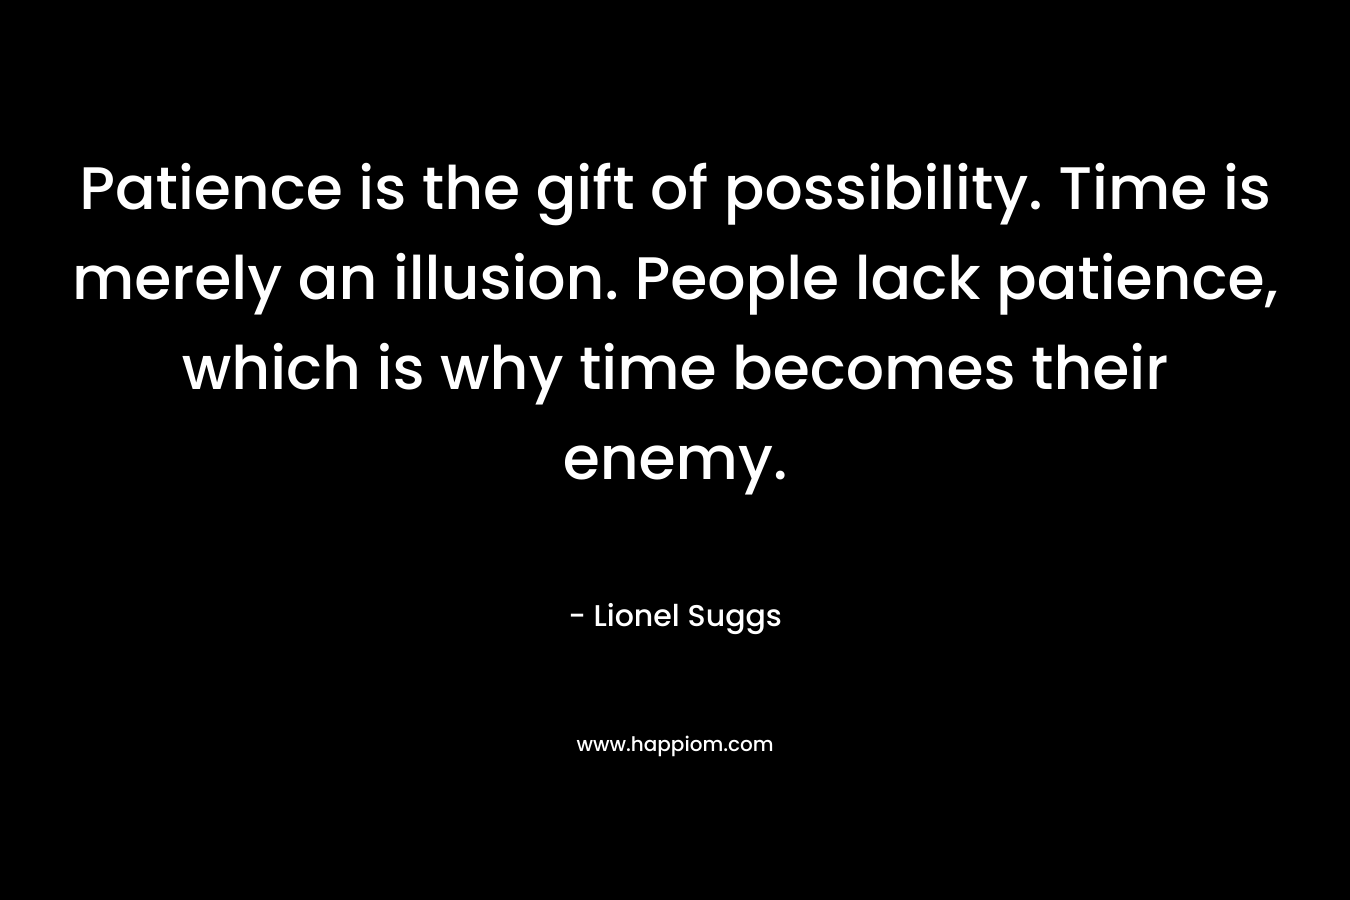 Patience is the gift of possibility. Time is merely an illusion. People lack patience, which is why time becomes their enemy.